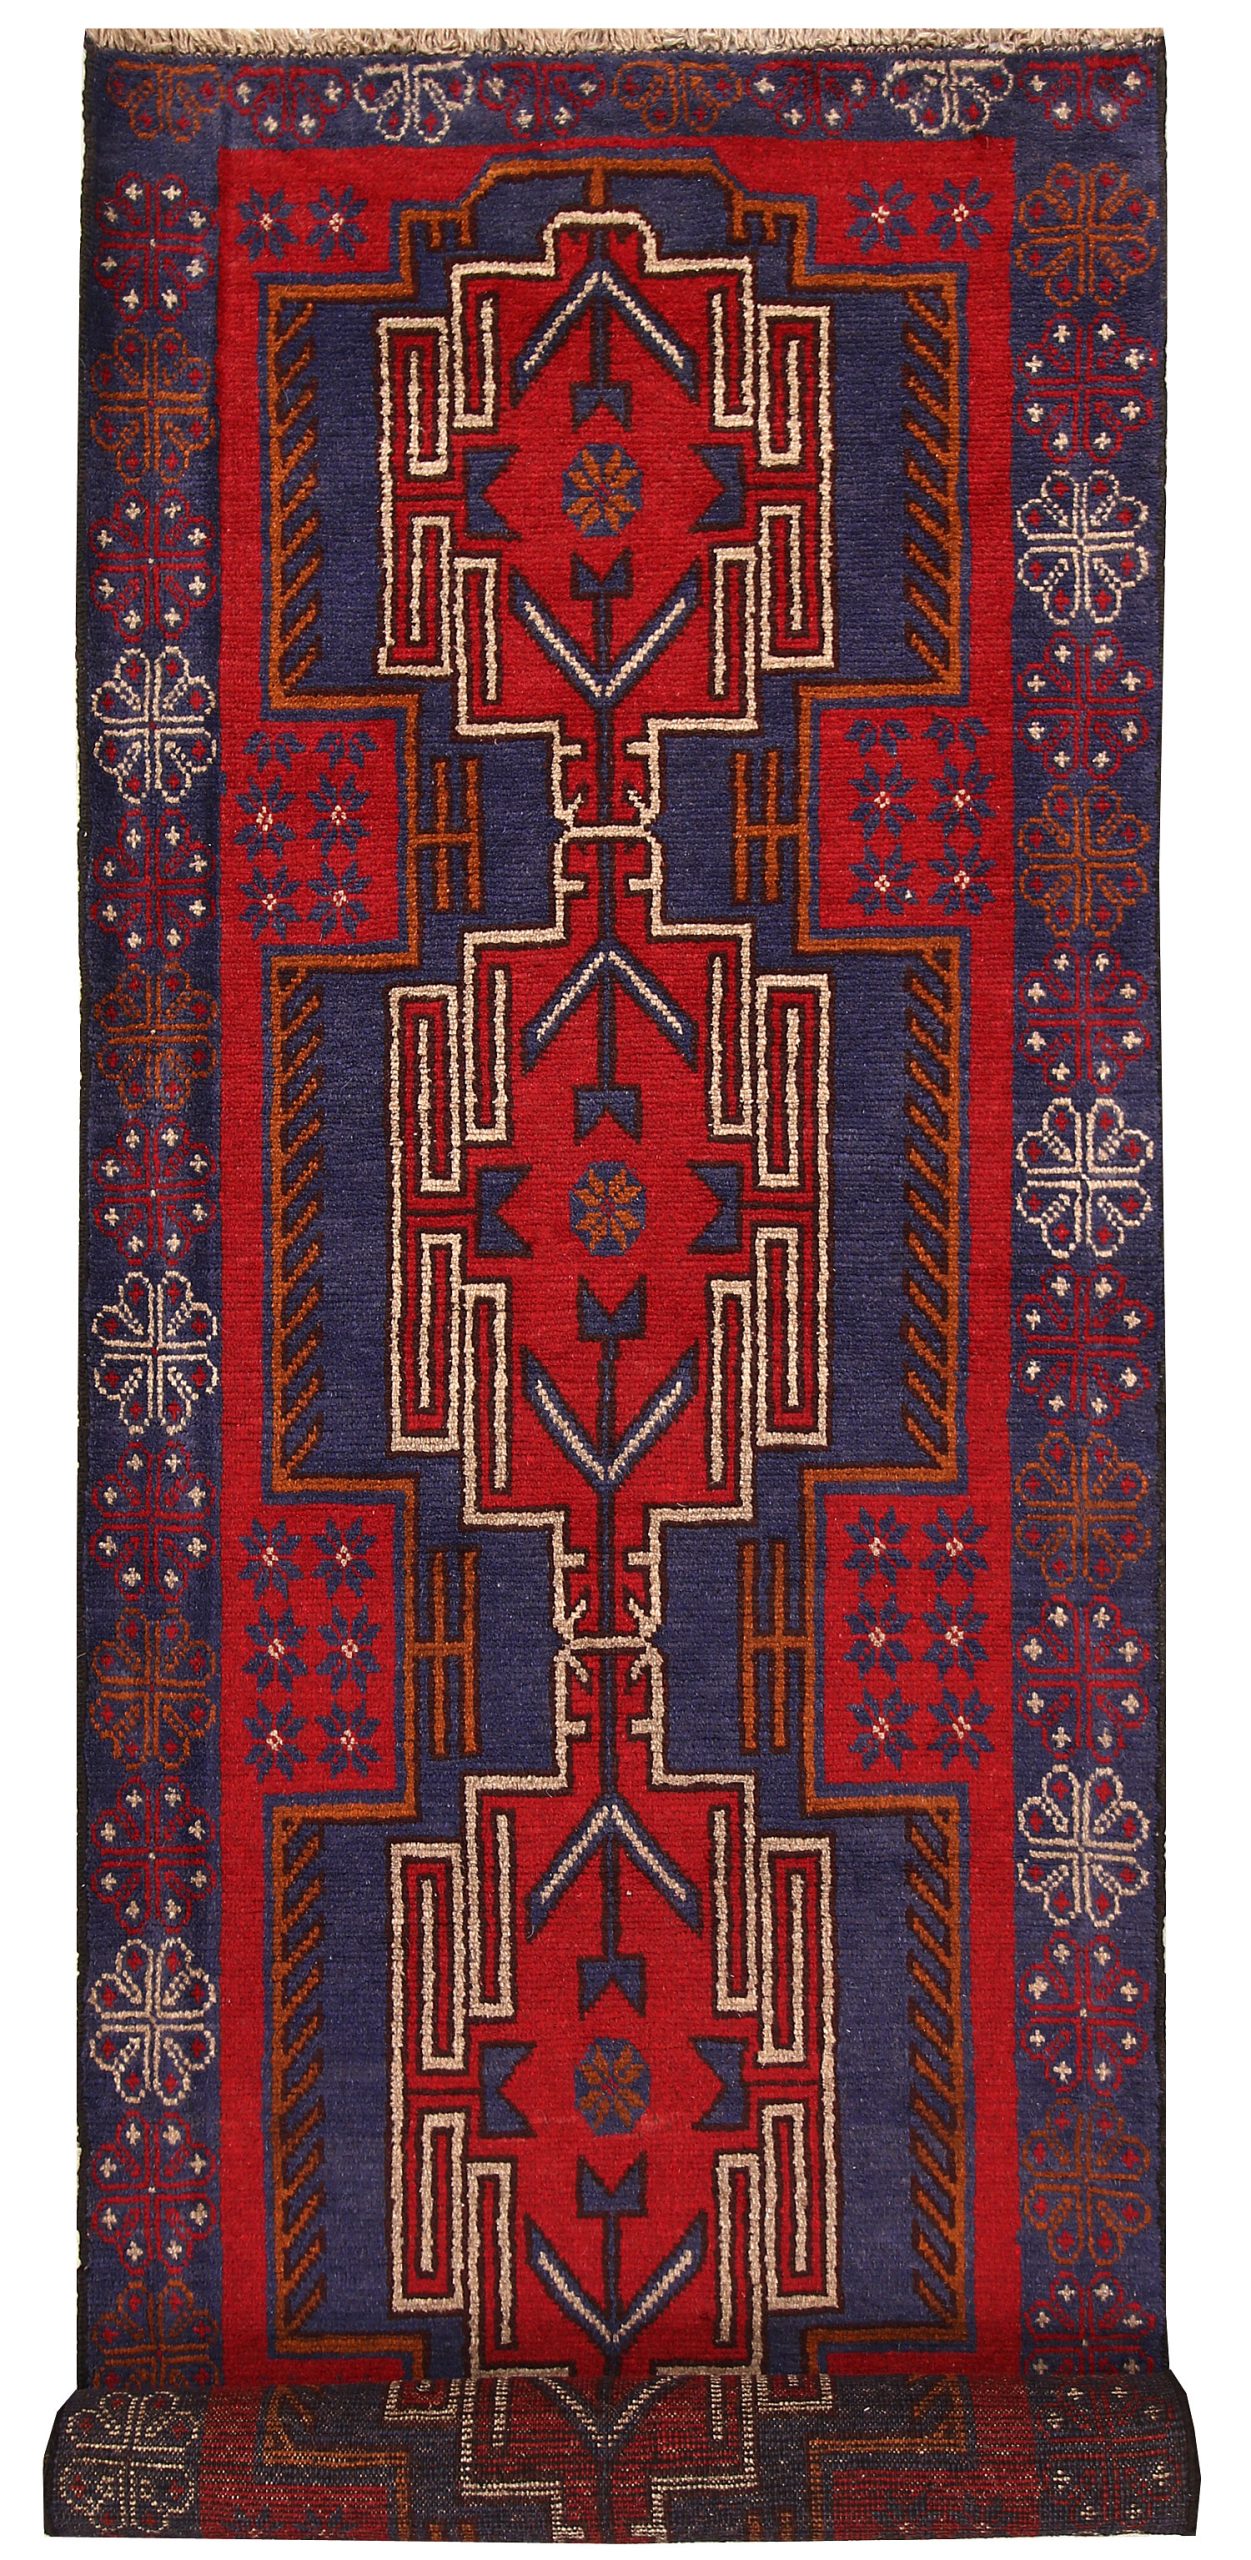 Where To Shop For Afghan Rugs